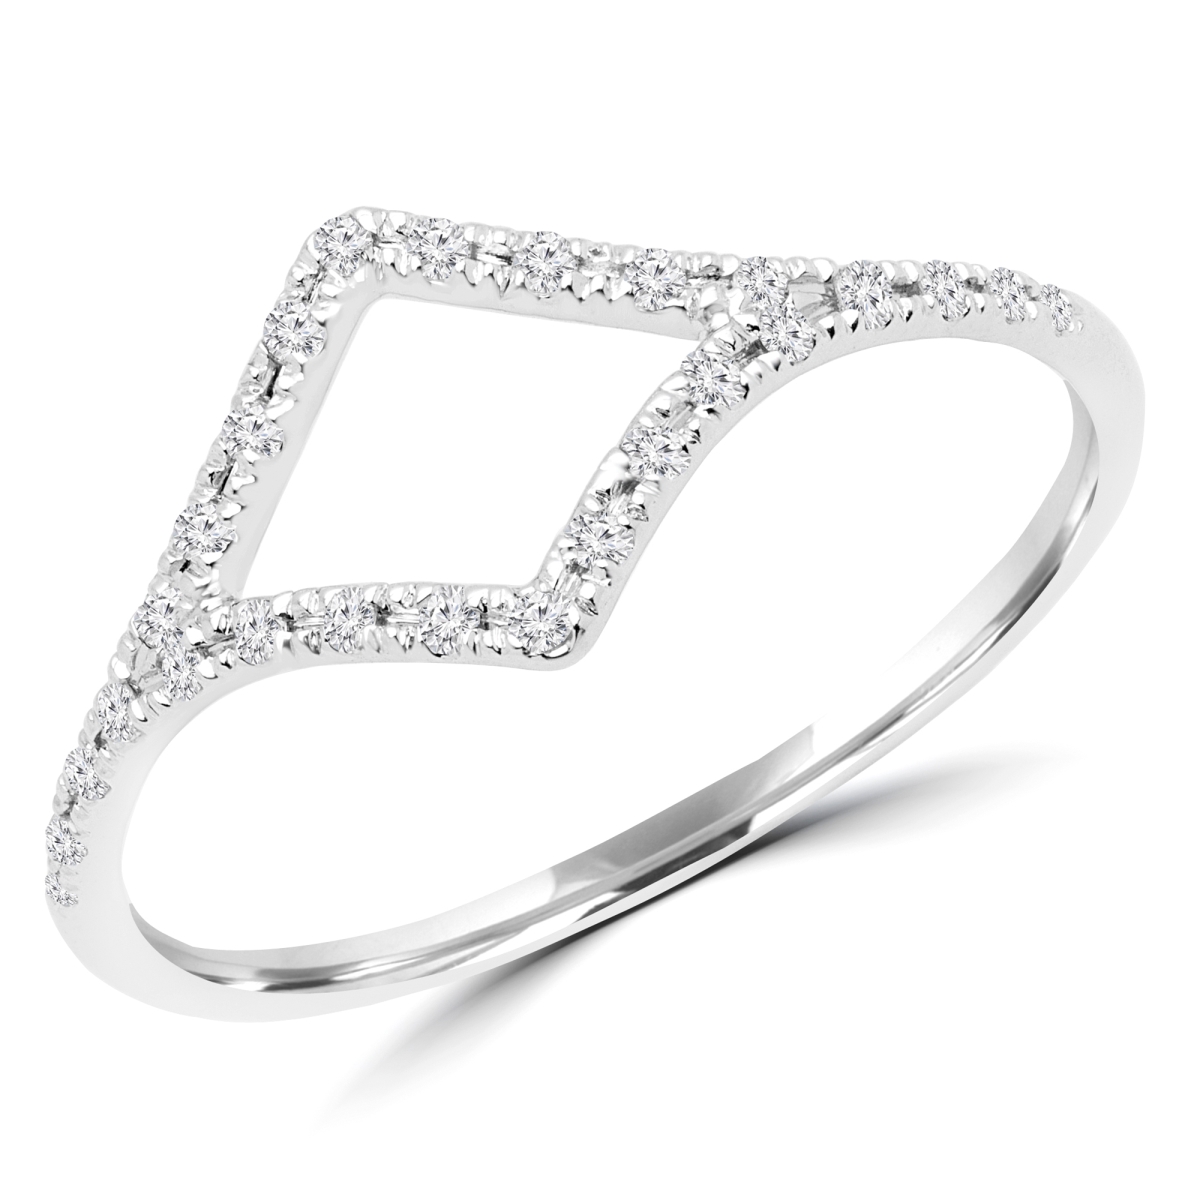 Picture of Majesty Diamonds MDR170053-8.75 0.1 CTW Round Diamond Cocktail Ring in 14K White Gold - 8.75